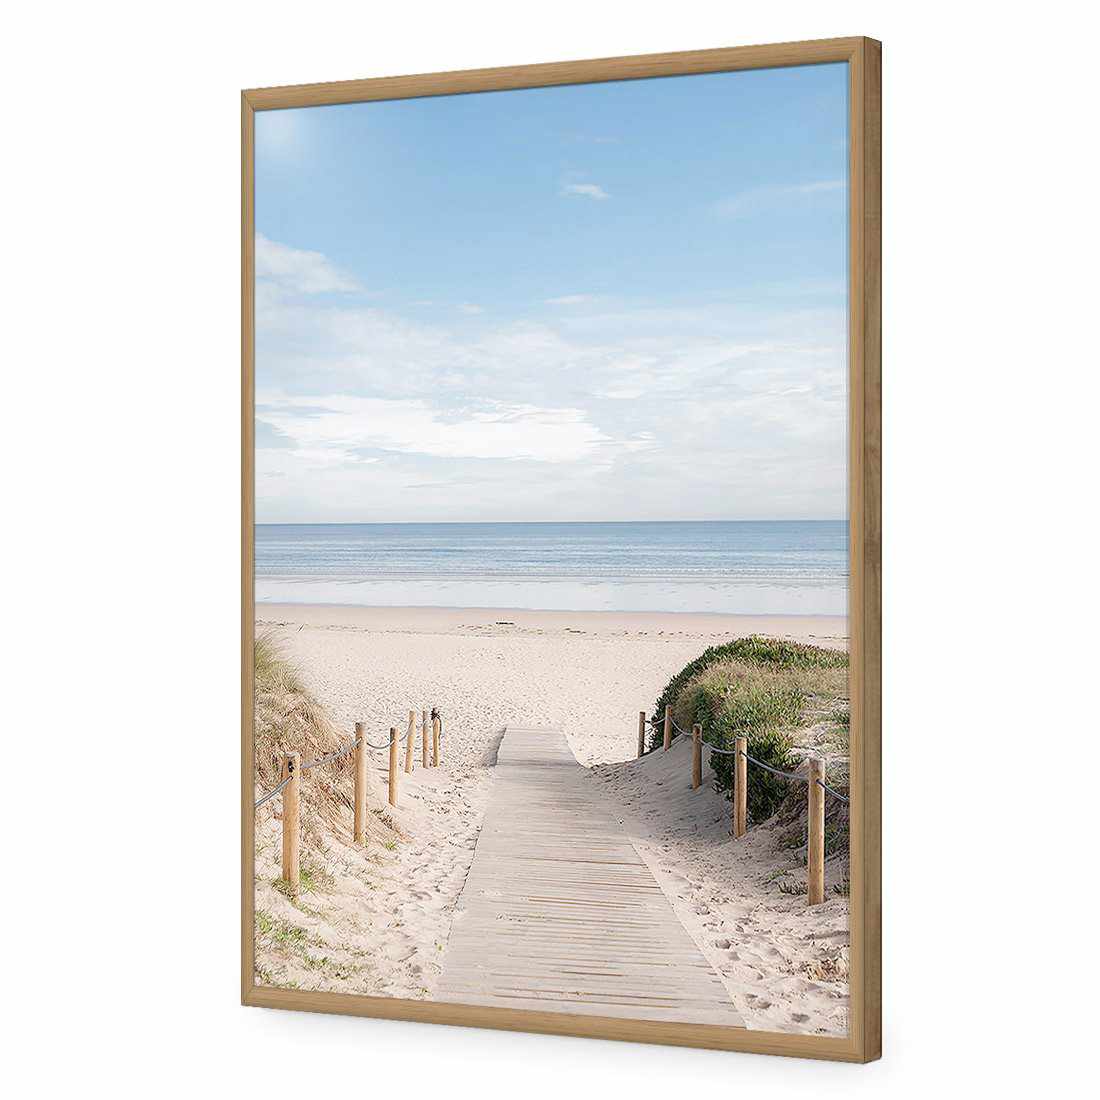 Pathway To The Sea-Acrylic-Wall Art Design-Without Border-Acrylic - Oak Frame-45x30cm-Wall Art Designs